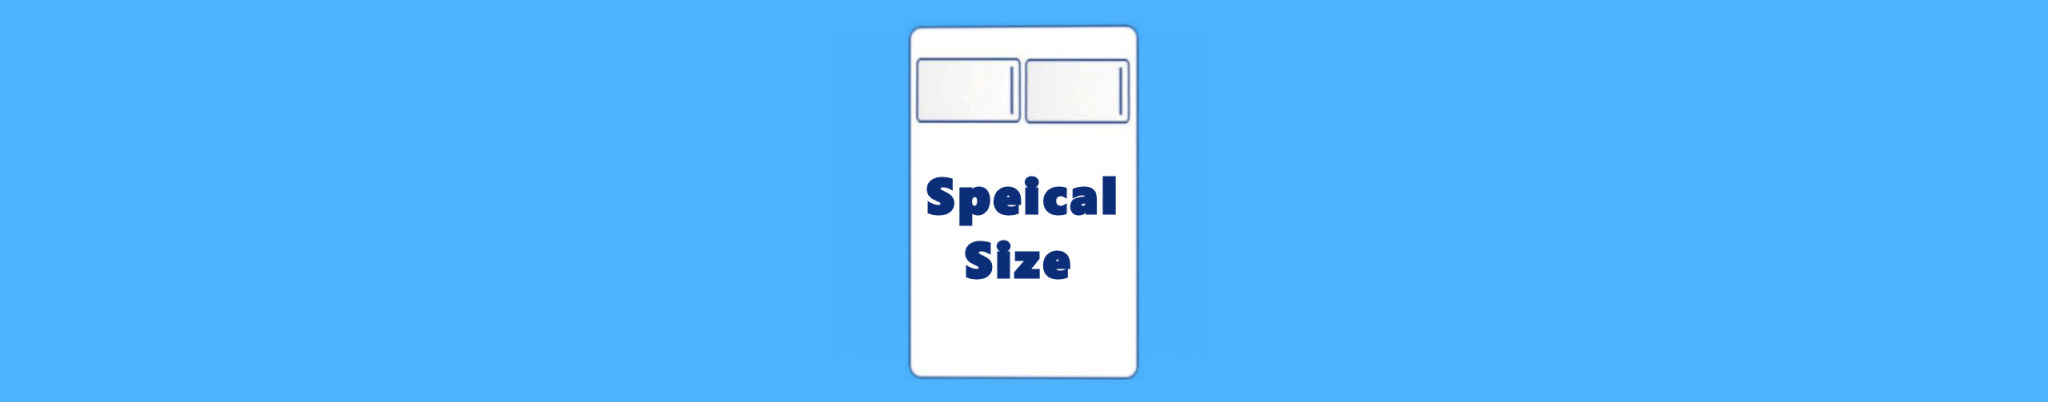 special size hospital bed mattress size